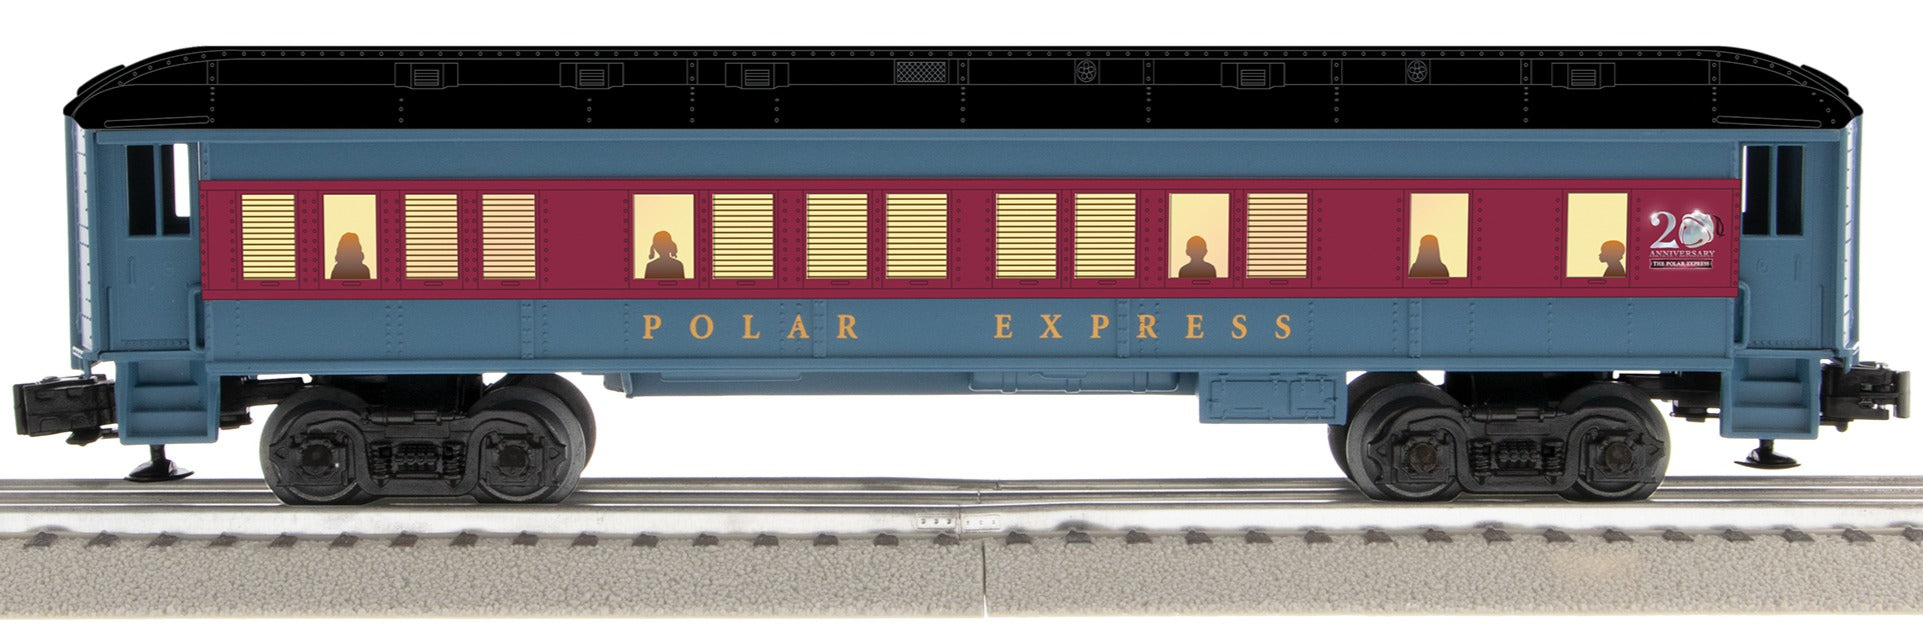 Lionel 2427990 - 20th Anniversary Coach Car "The Polar Express" (Black Roof) Add-On